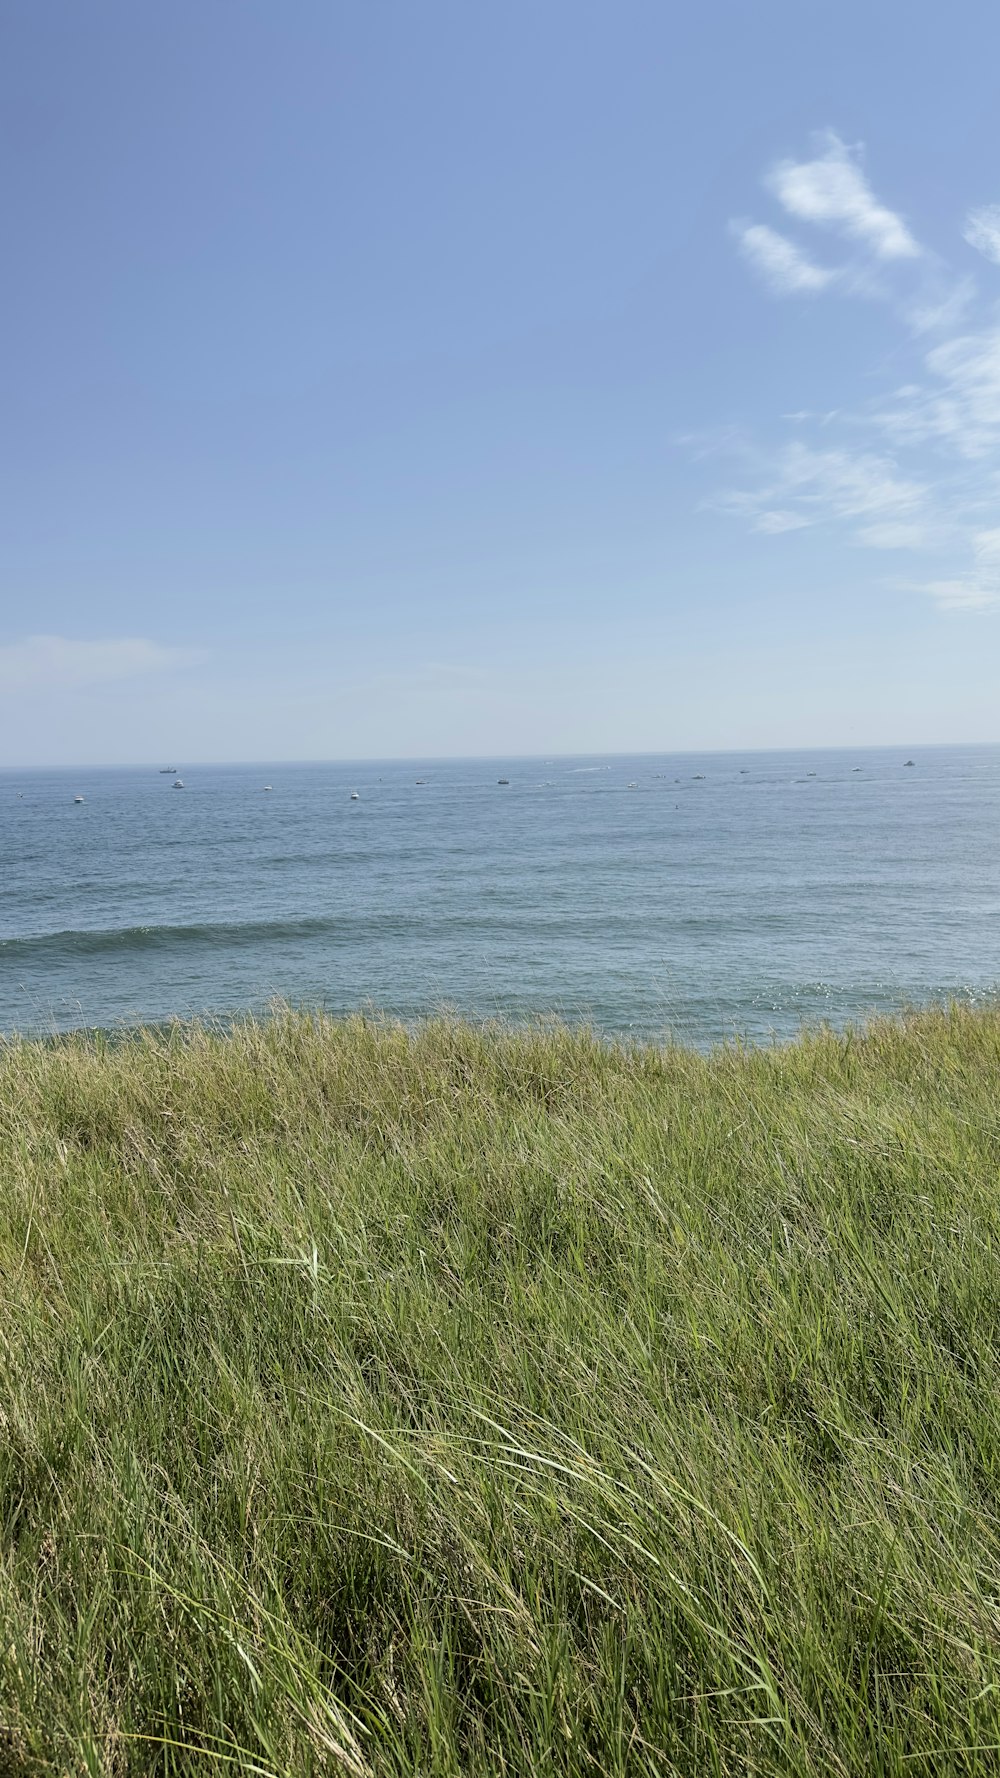 a view of the ocean from a grassy hill